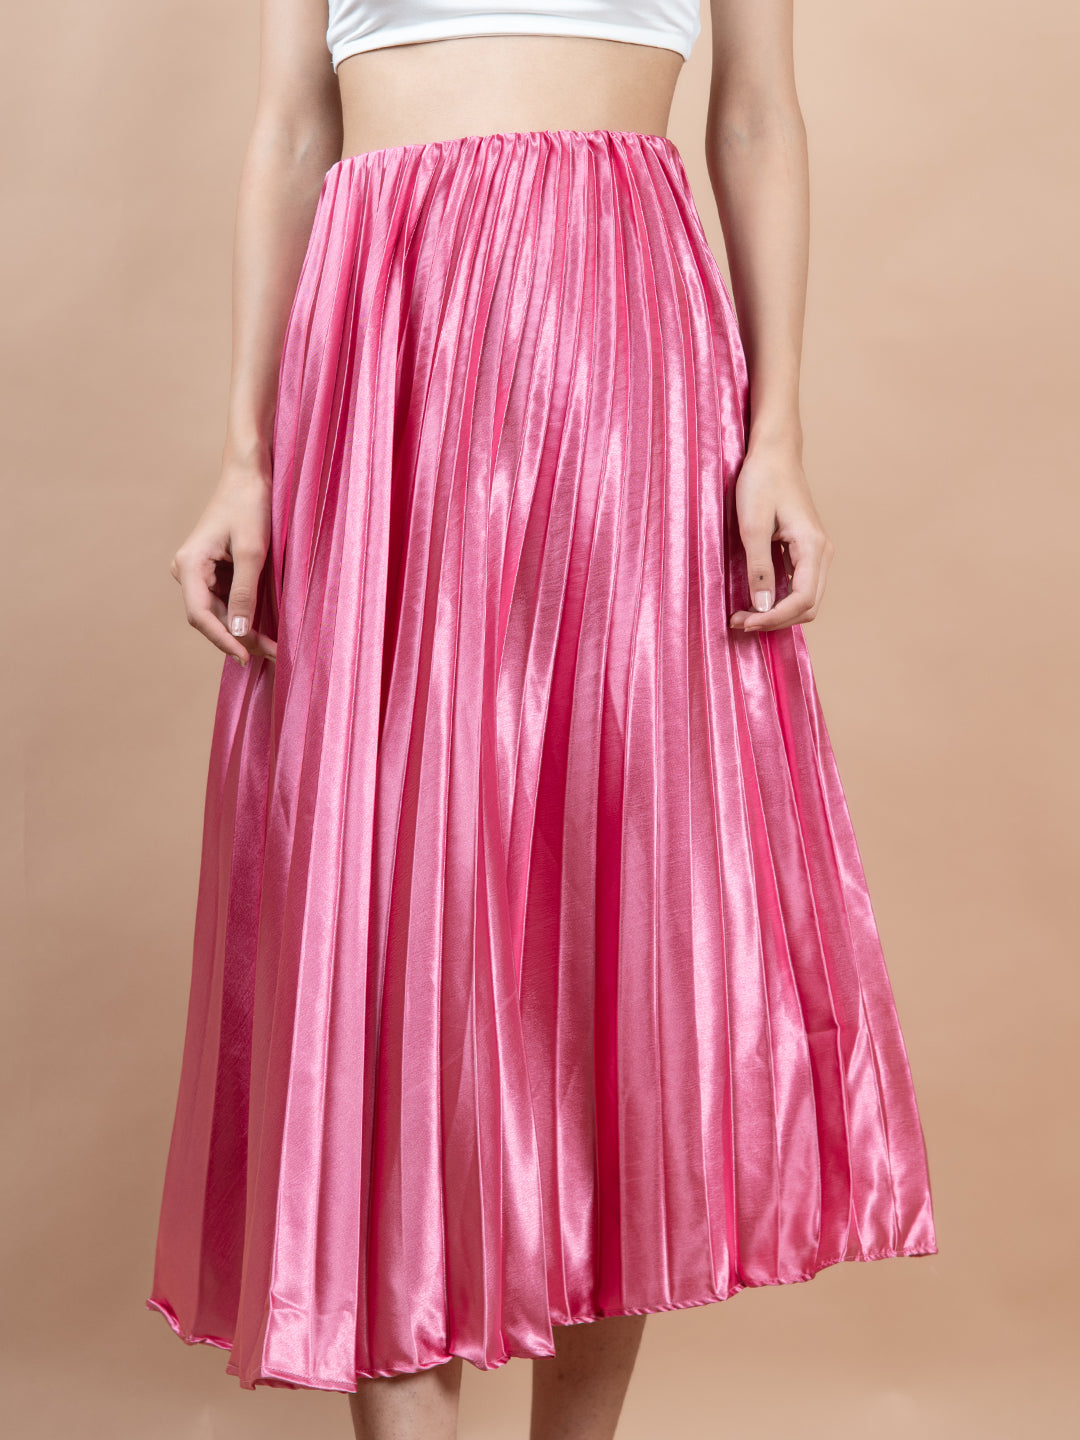 Rosy Pink Flared Skirt with Accordion Pleats